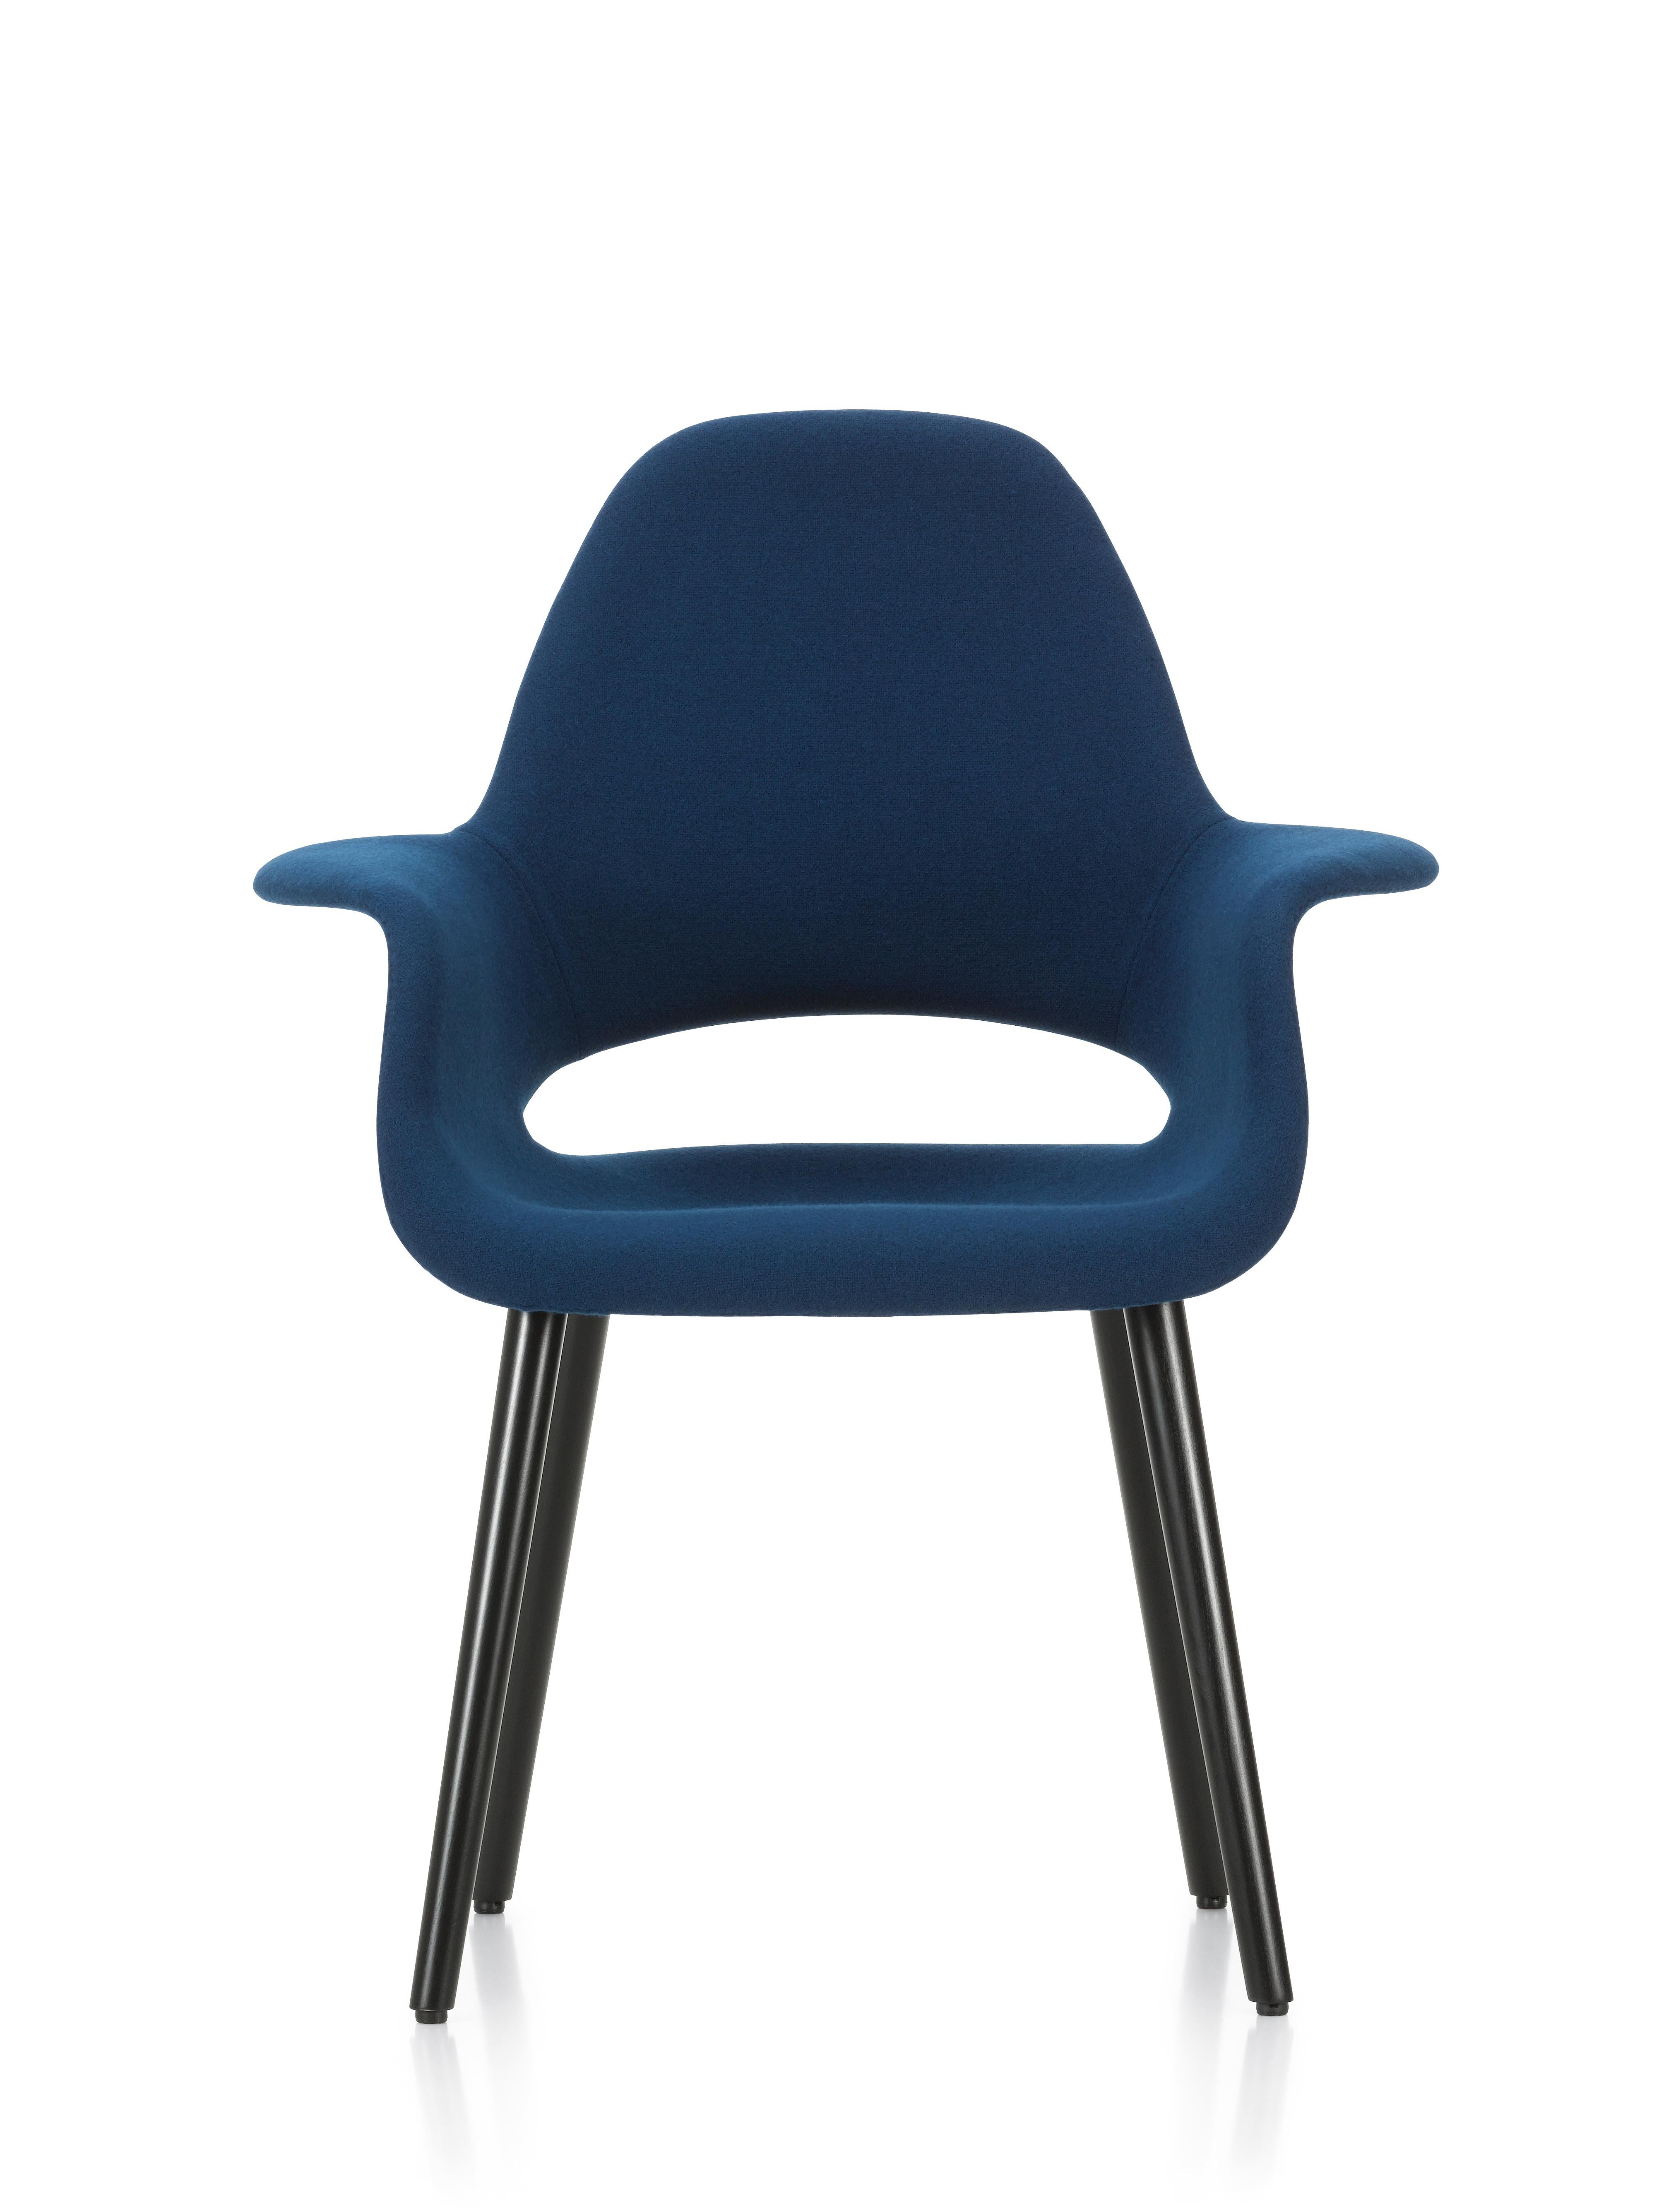 These items are currently only available in the United States.

The organic chair – a small and comfortable reading chair – was developed in several versions for the 1940 ‘Organic Design in Home Furnishings’ competition organized by the Museum of